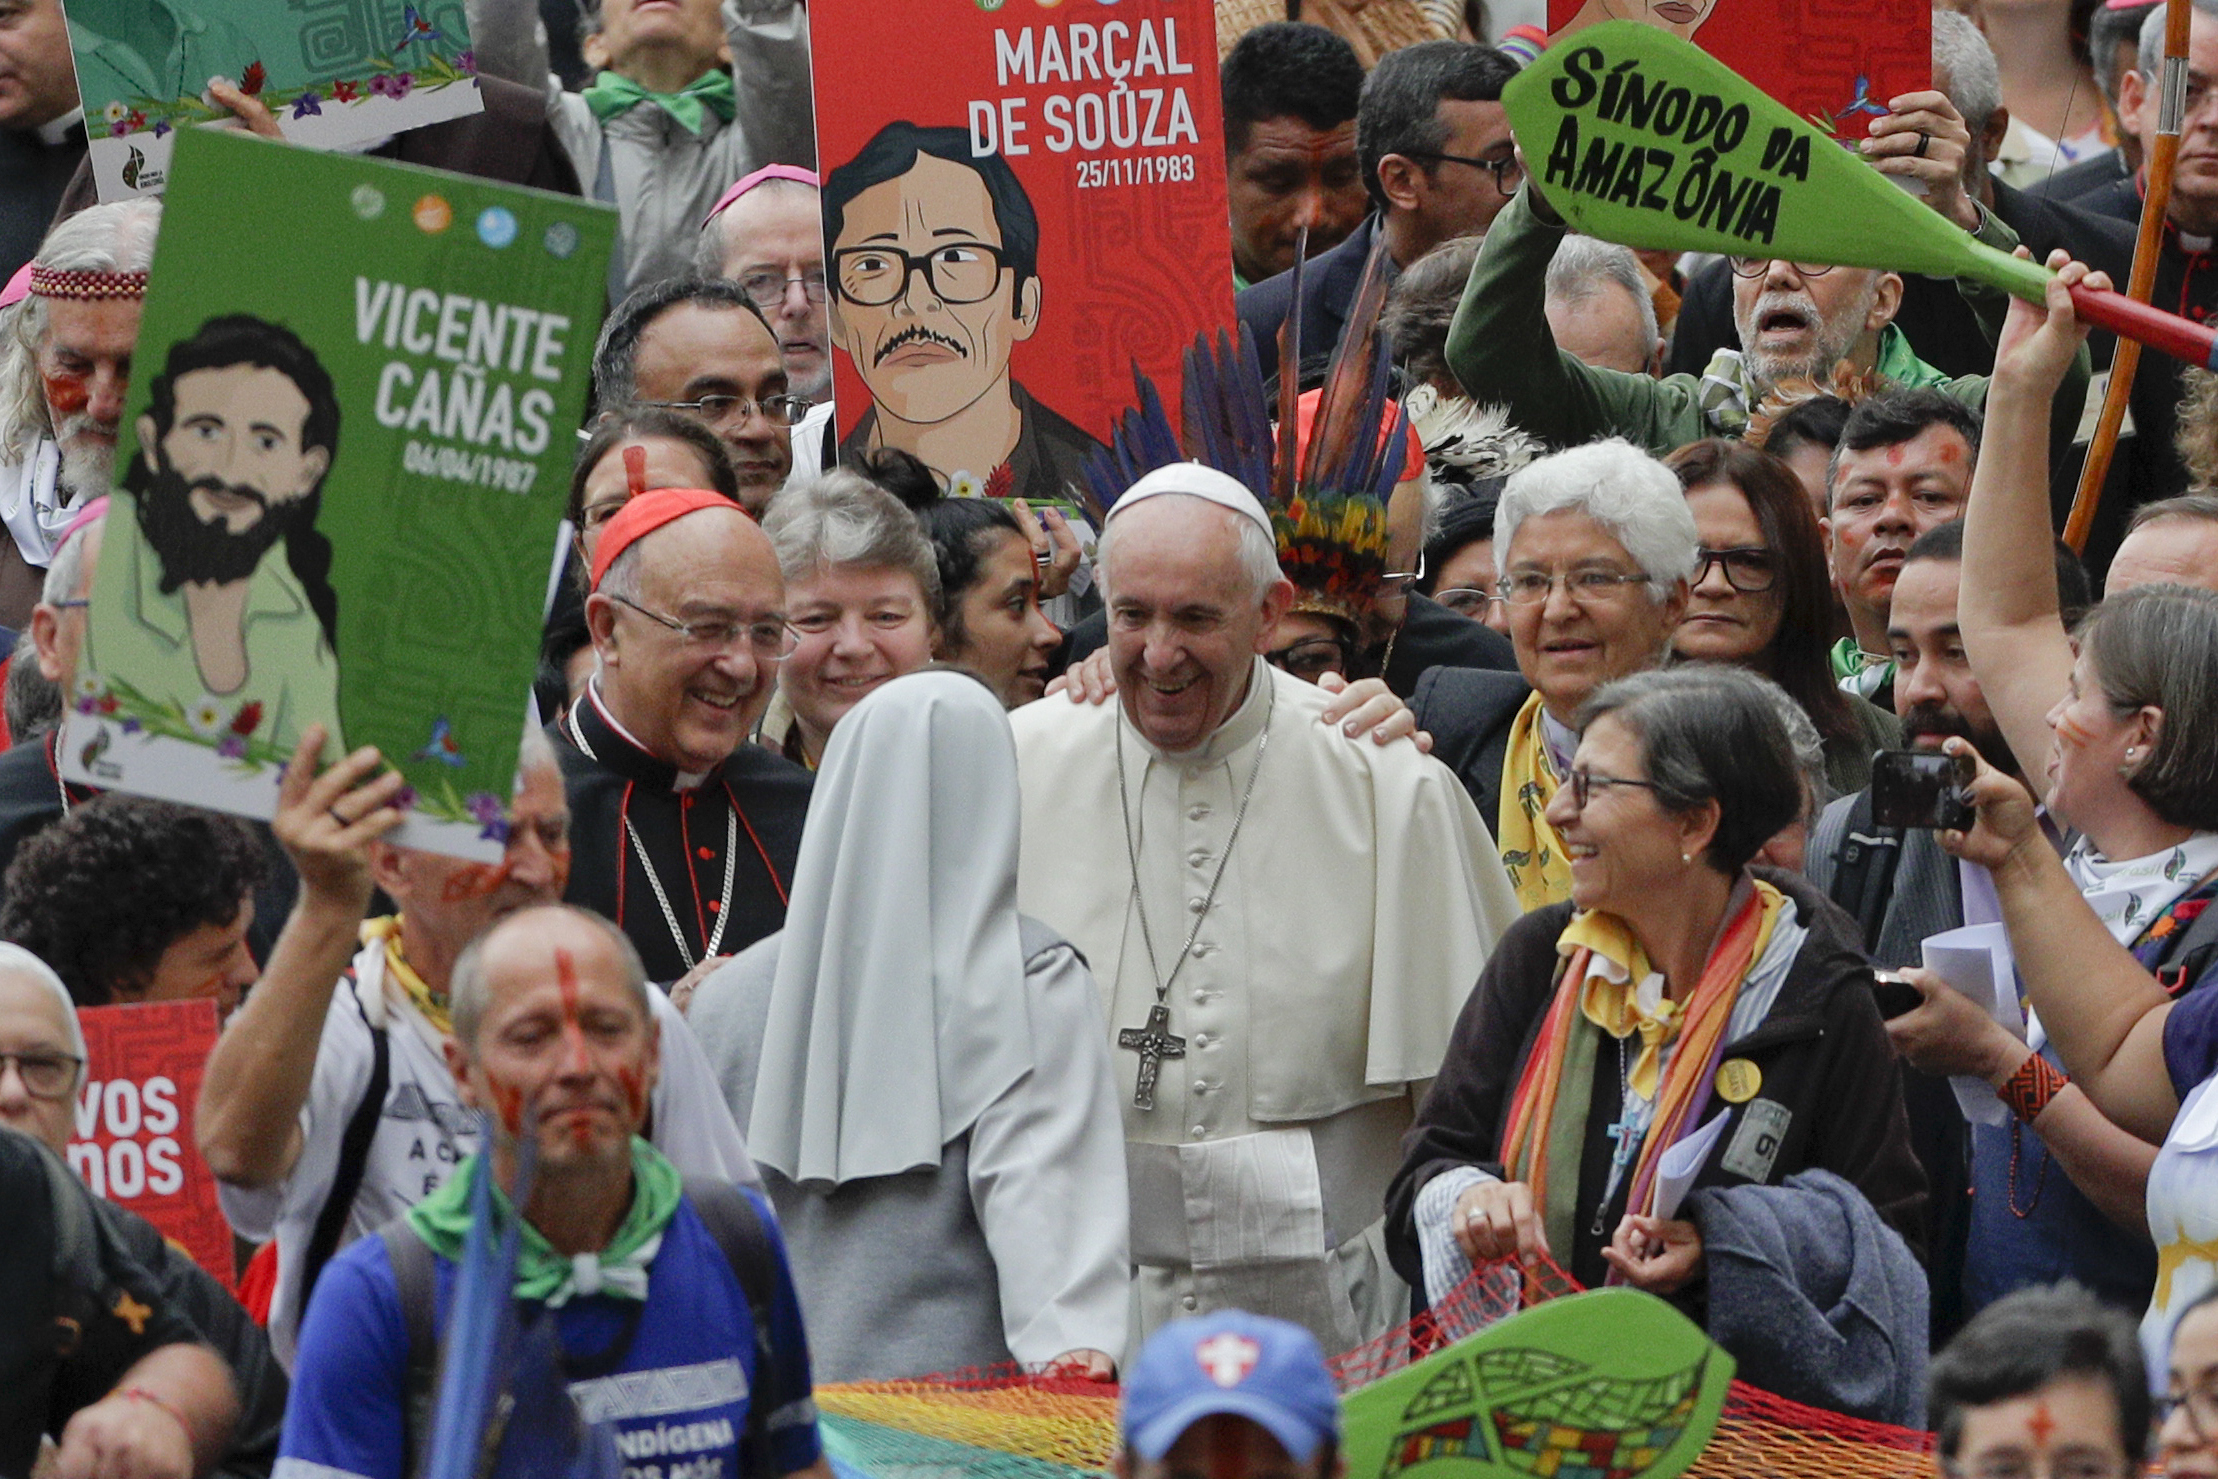 Pope Francis smiles to a nun as he walks in procession on the occasion of the Amazon synod, at the Vatican, Monday, Oct. 7, 2019. Pope Francis opened a three-week meeting on preserving the rainforest and ministering to its native people as he fended off attacks from conservatives who are opposed to his ecological agenda. (AP Photo/Andrew Medichini)